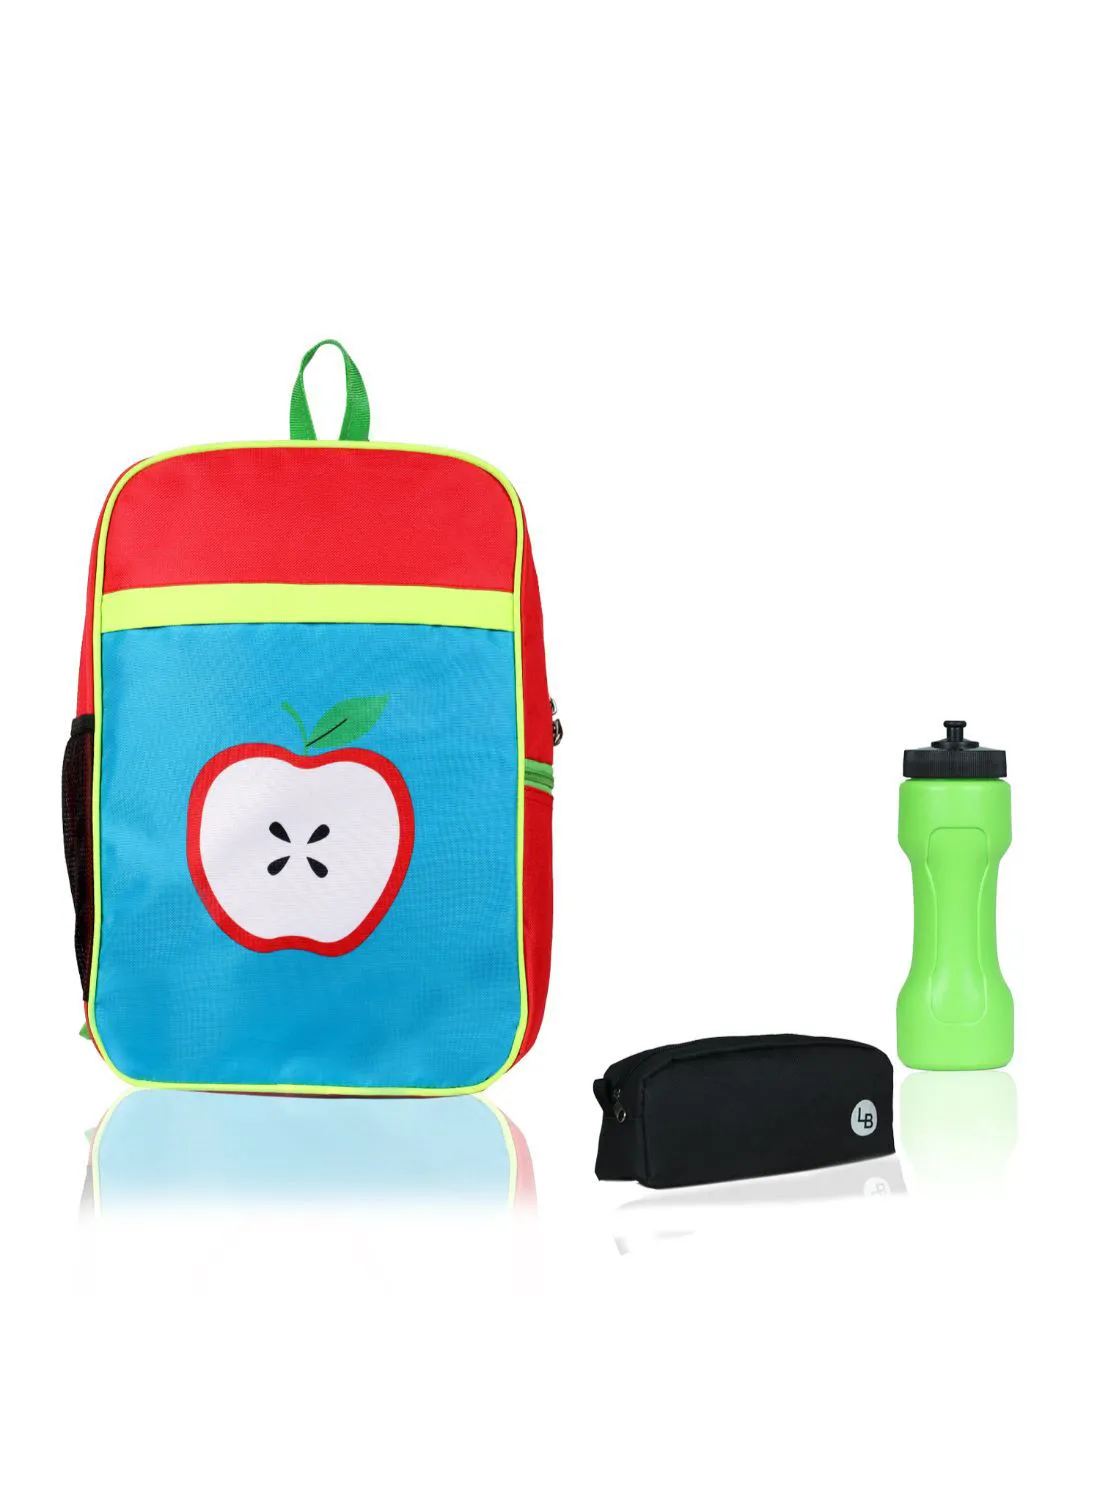 LIONBONE Apple Printed Polyester Kids Backpack with zip closure Ideal for 4-6 years age group, Plastic Sipper And Polyester Pouch SkyBlue-Red